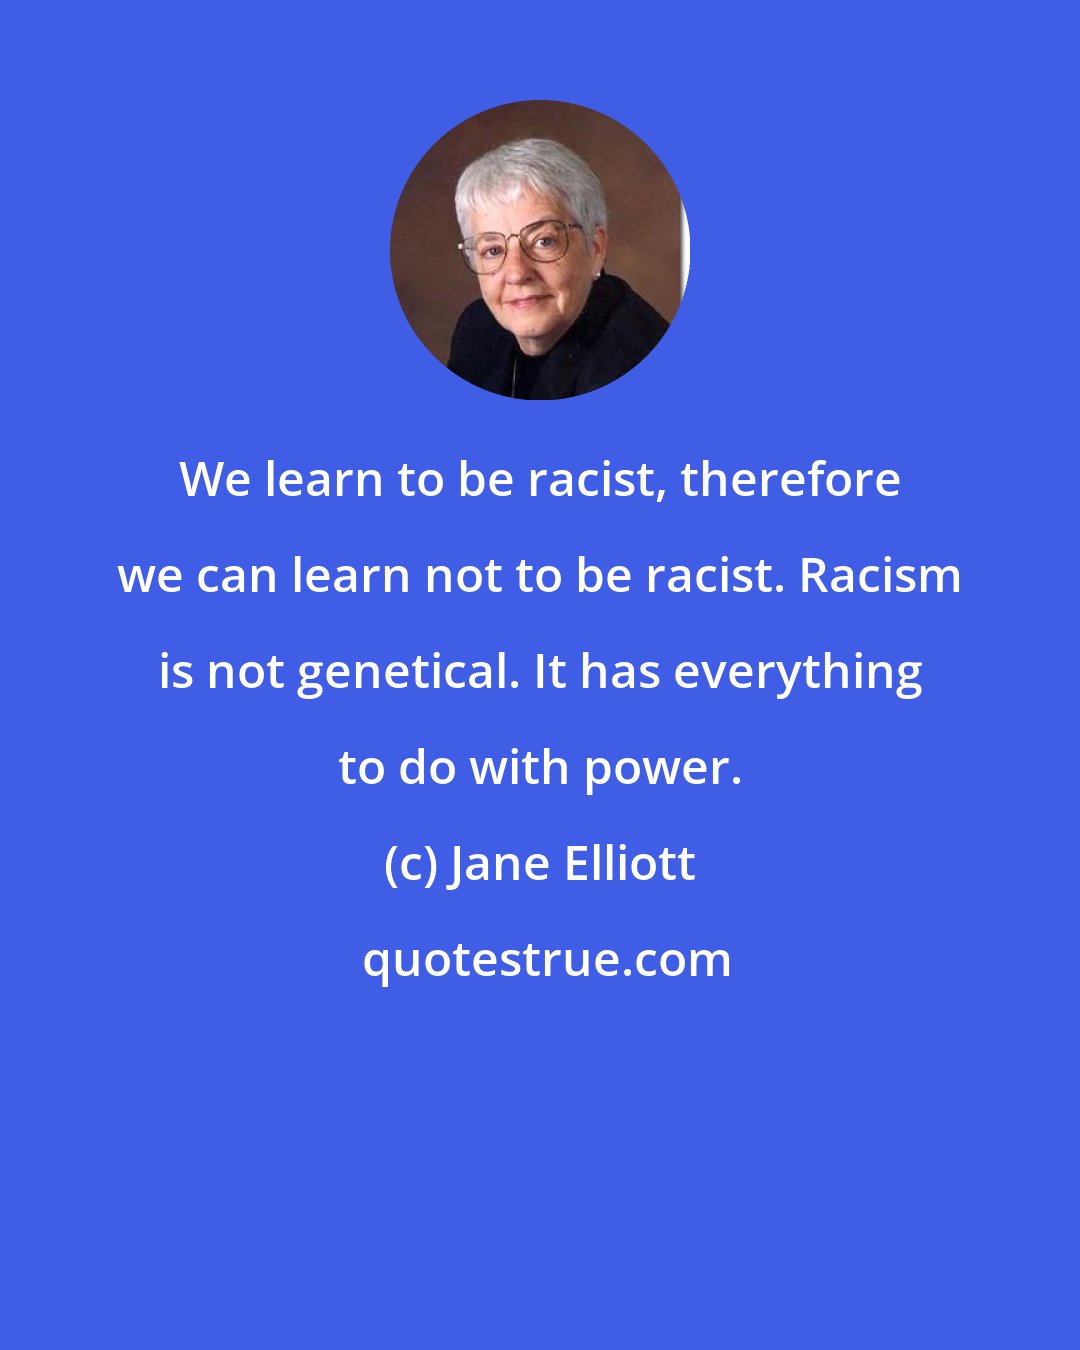 Jane Elliott: We learn to be racist, therefore we can learn not to be racist. Racism is not genetical. It has everything to do with power.